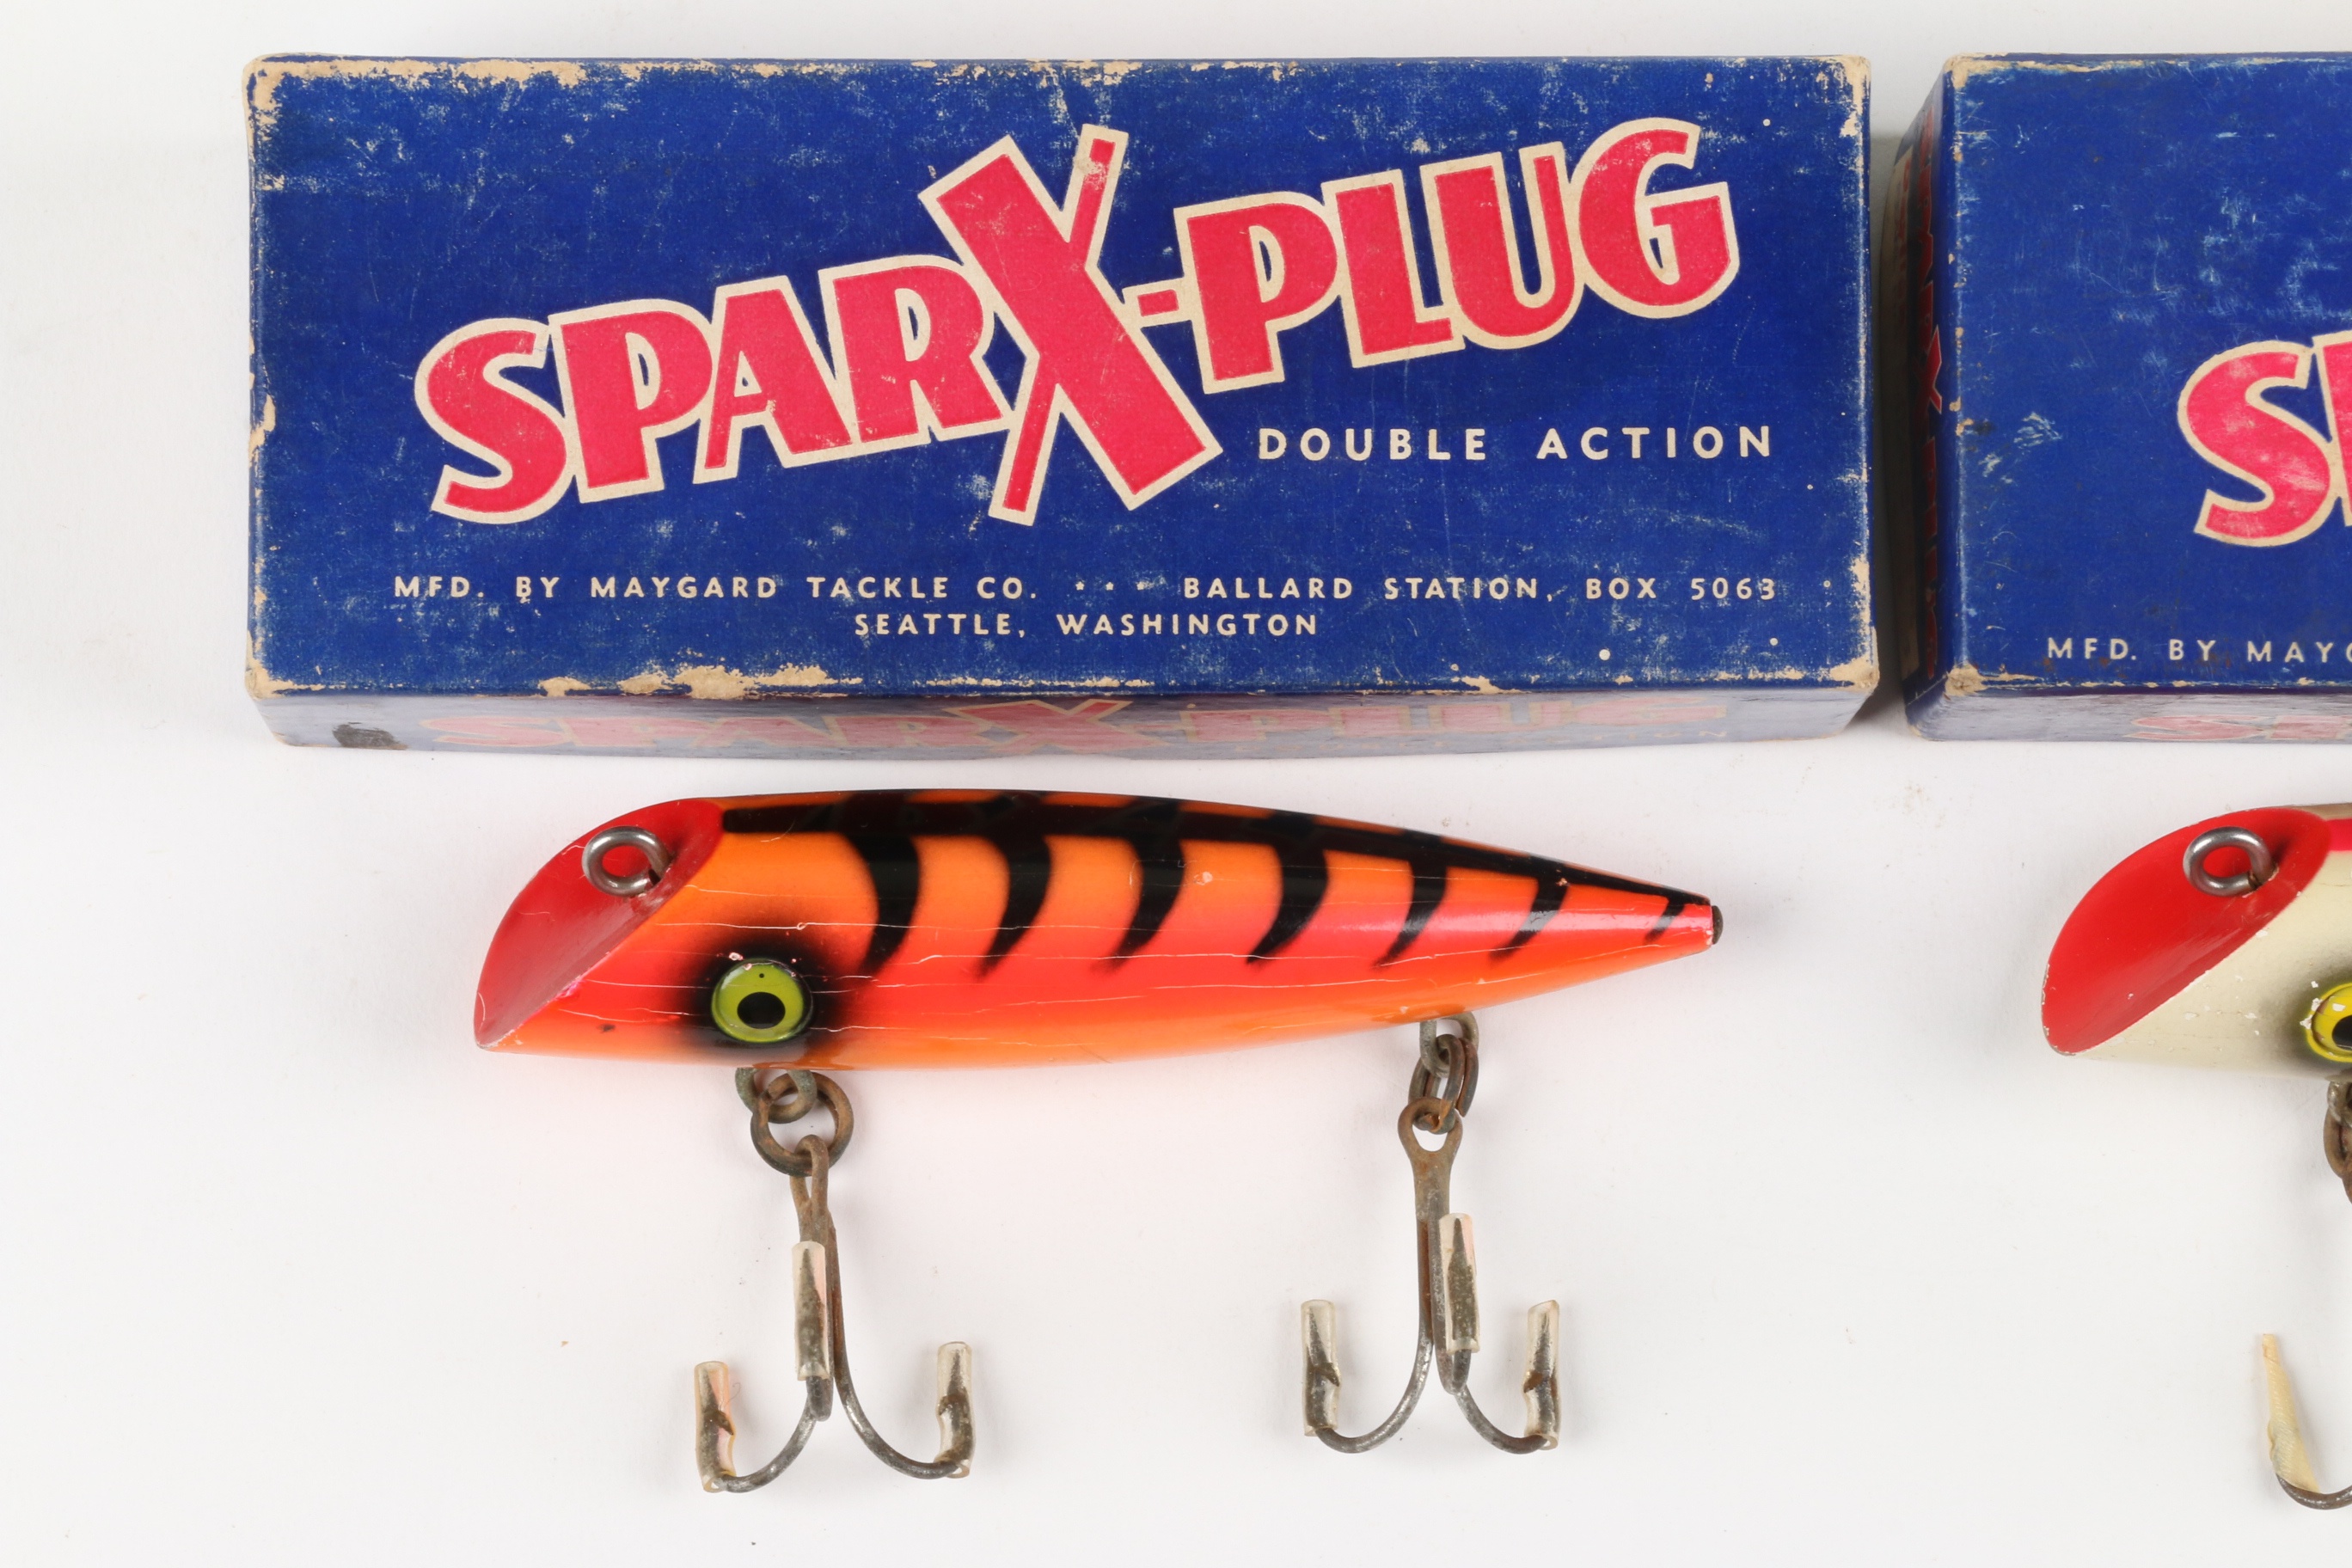 Vintage Sparx-plug Double Acting Fishing Lure in Box / Antique